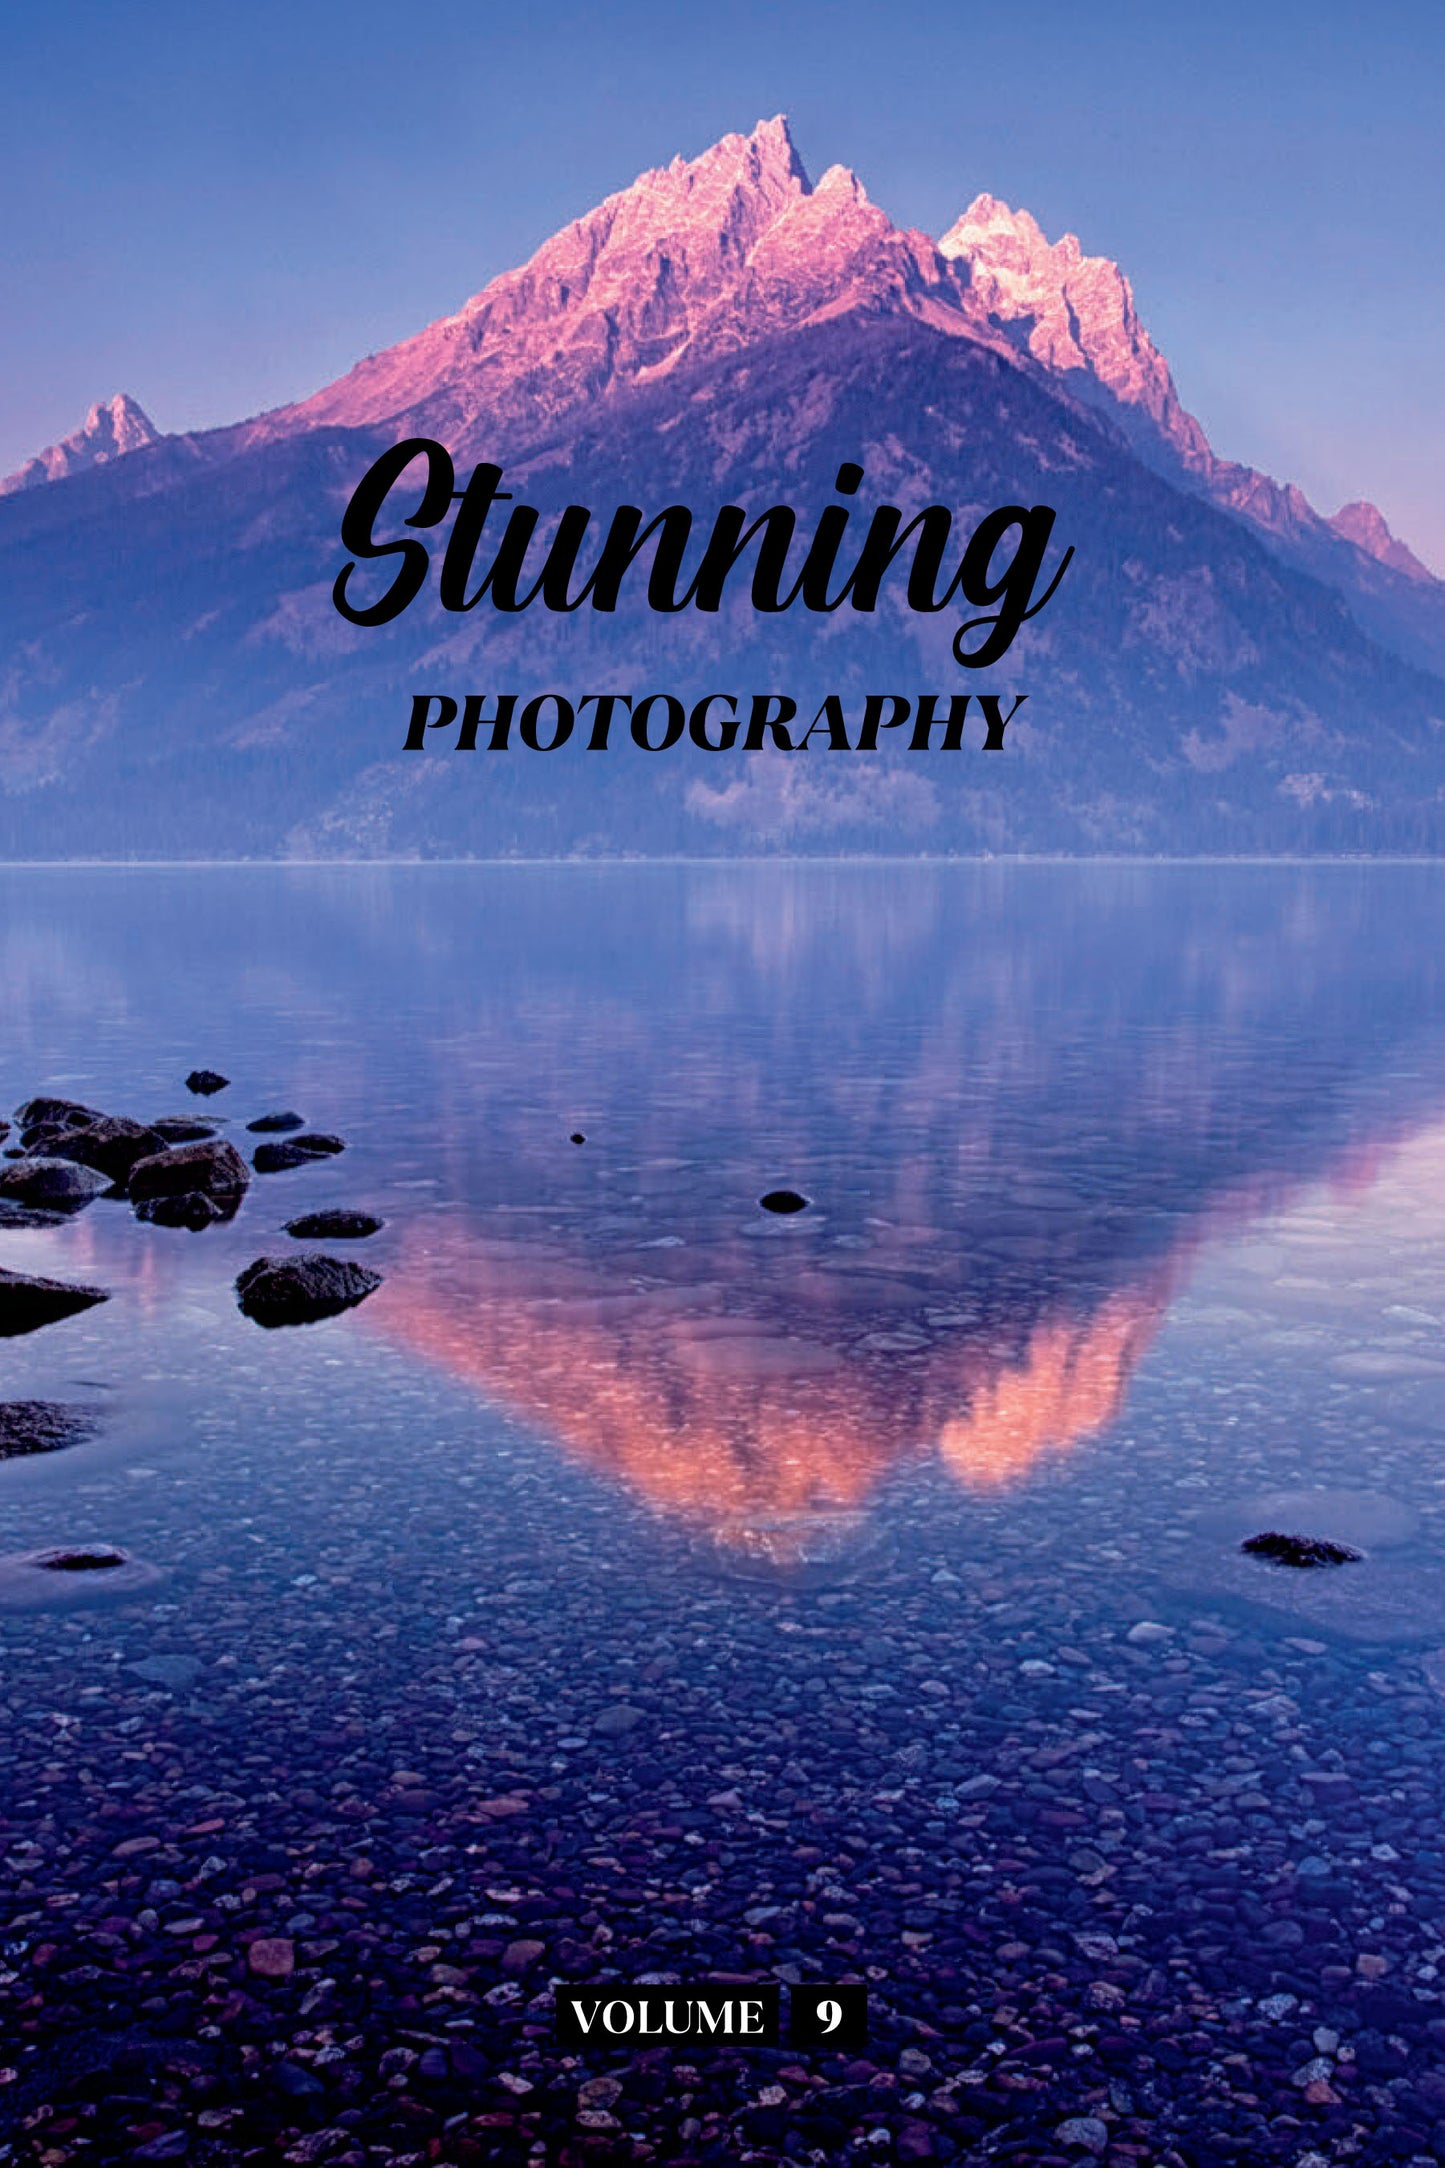 Stunning Photography Volume 9 (Physical Book)